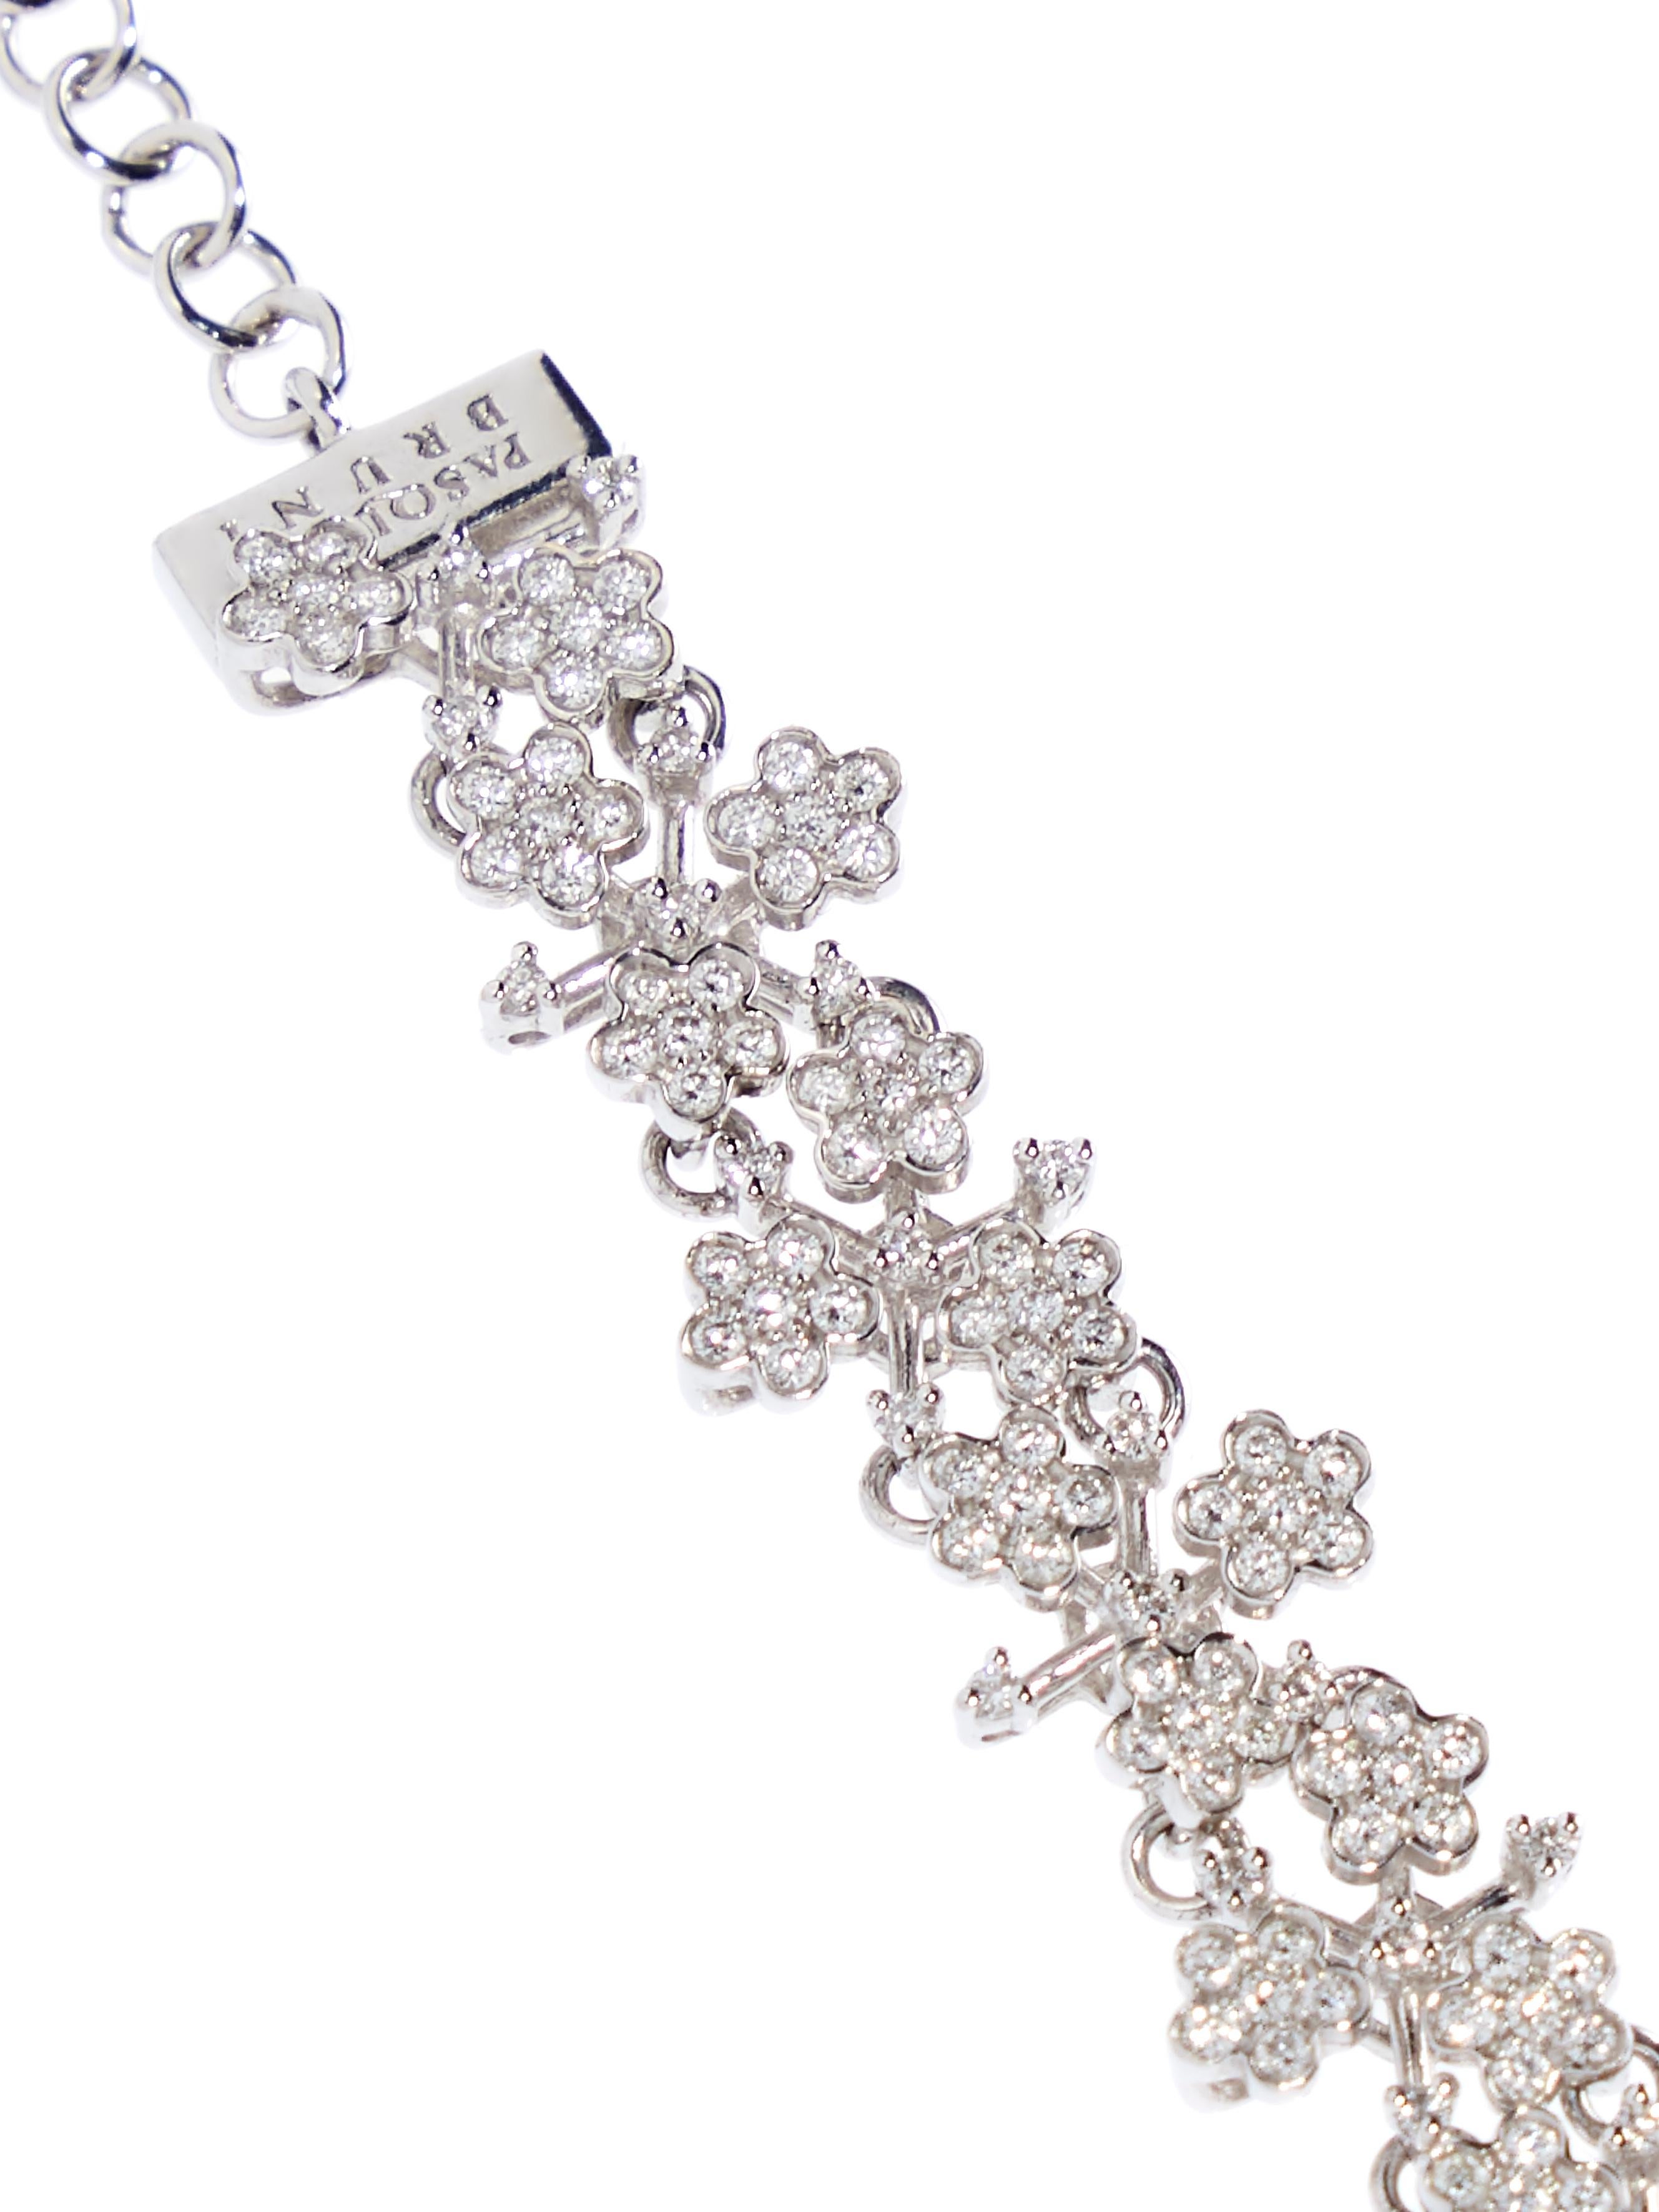 18 karat white gold bracelet in an open work design with flowers each individually set with 6 round brilliant cut diamonds, total 1.54 ct. Each little flower is linked to the next creating a flexible and comfortable to wear bracelet. The subtle